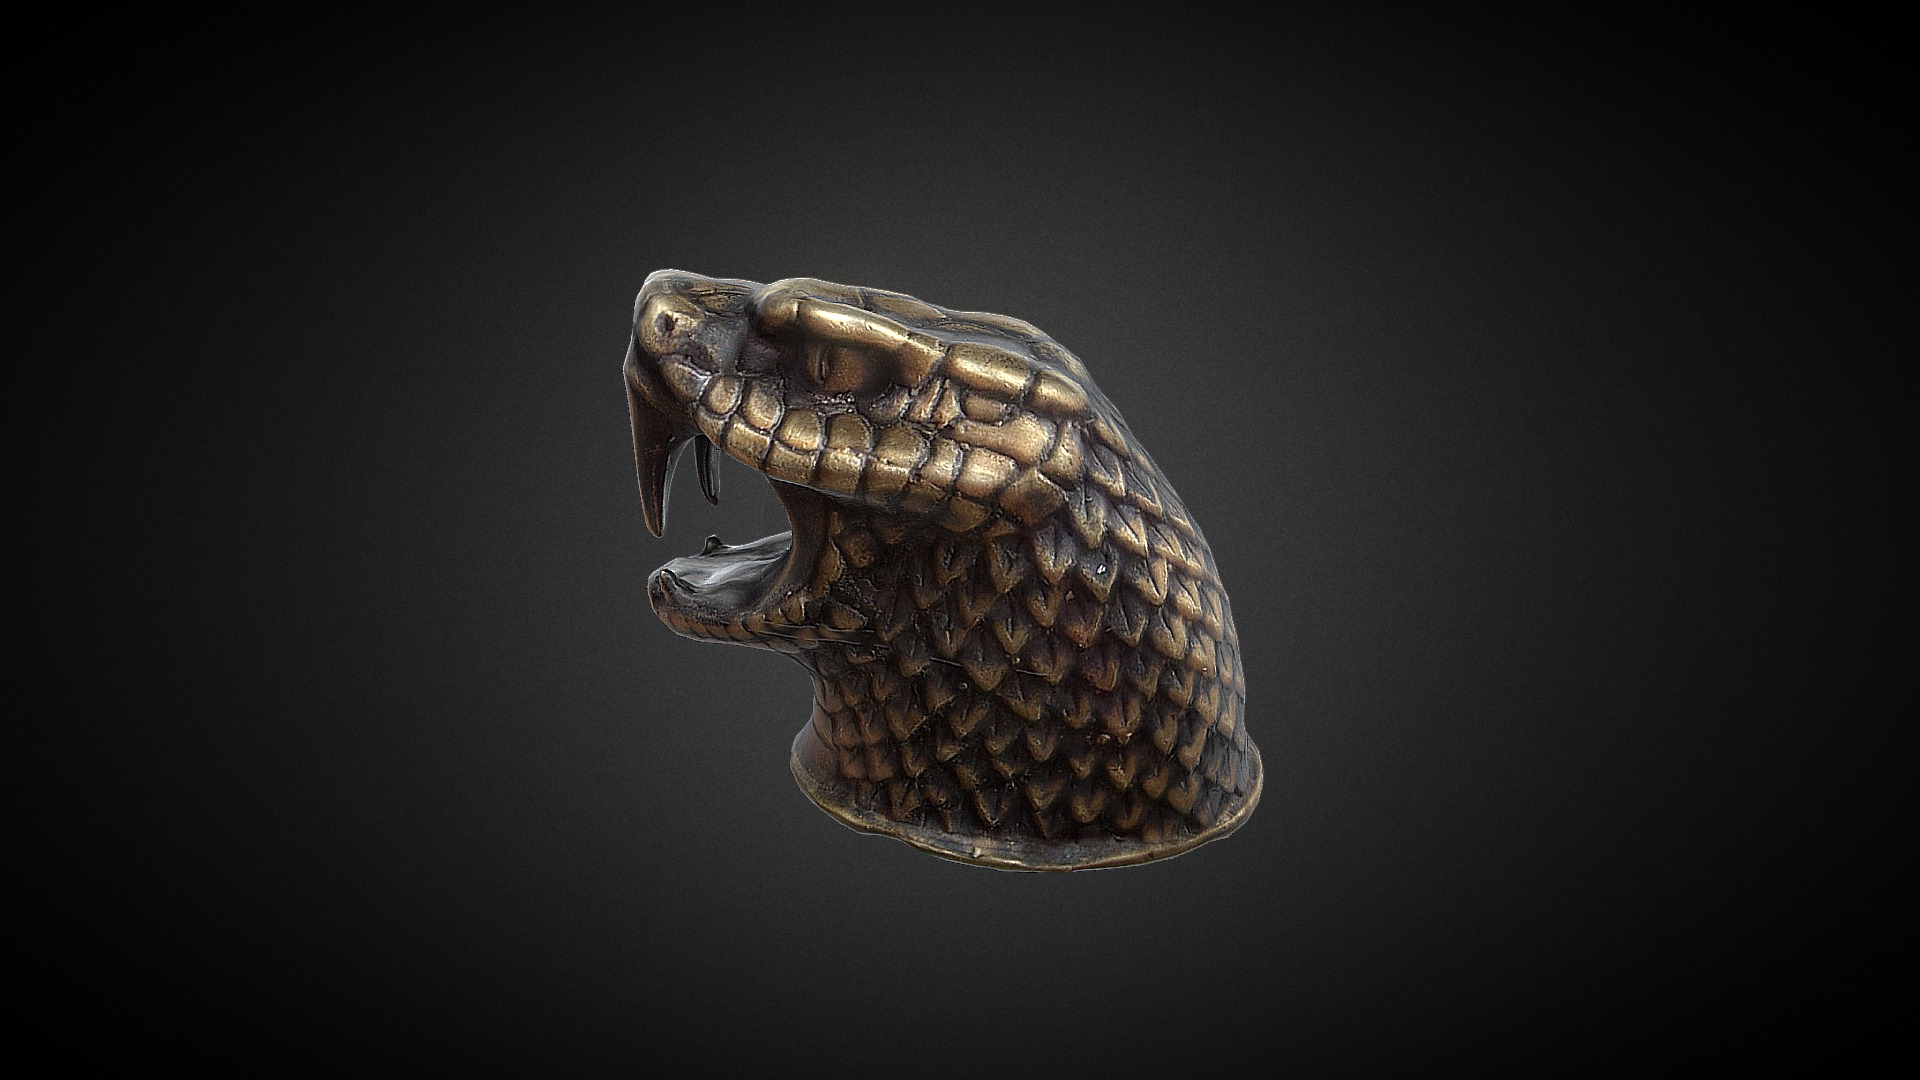 3D model Snake head Asset - This is a 3D model of the Snake head Asset. The 3D model is about a turtle with a black background.